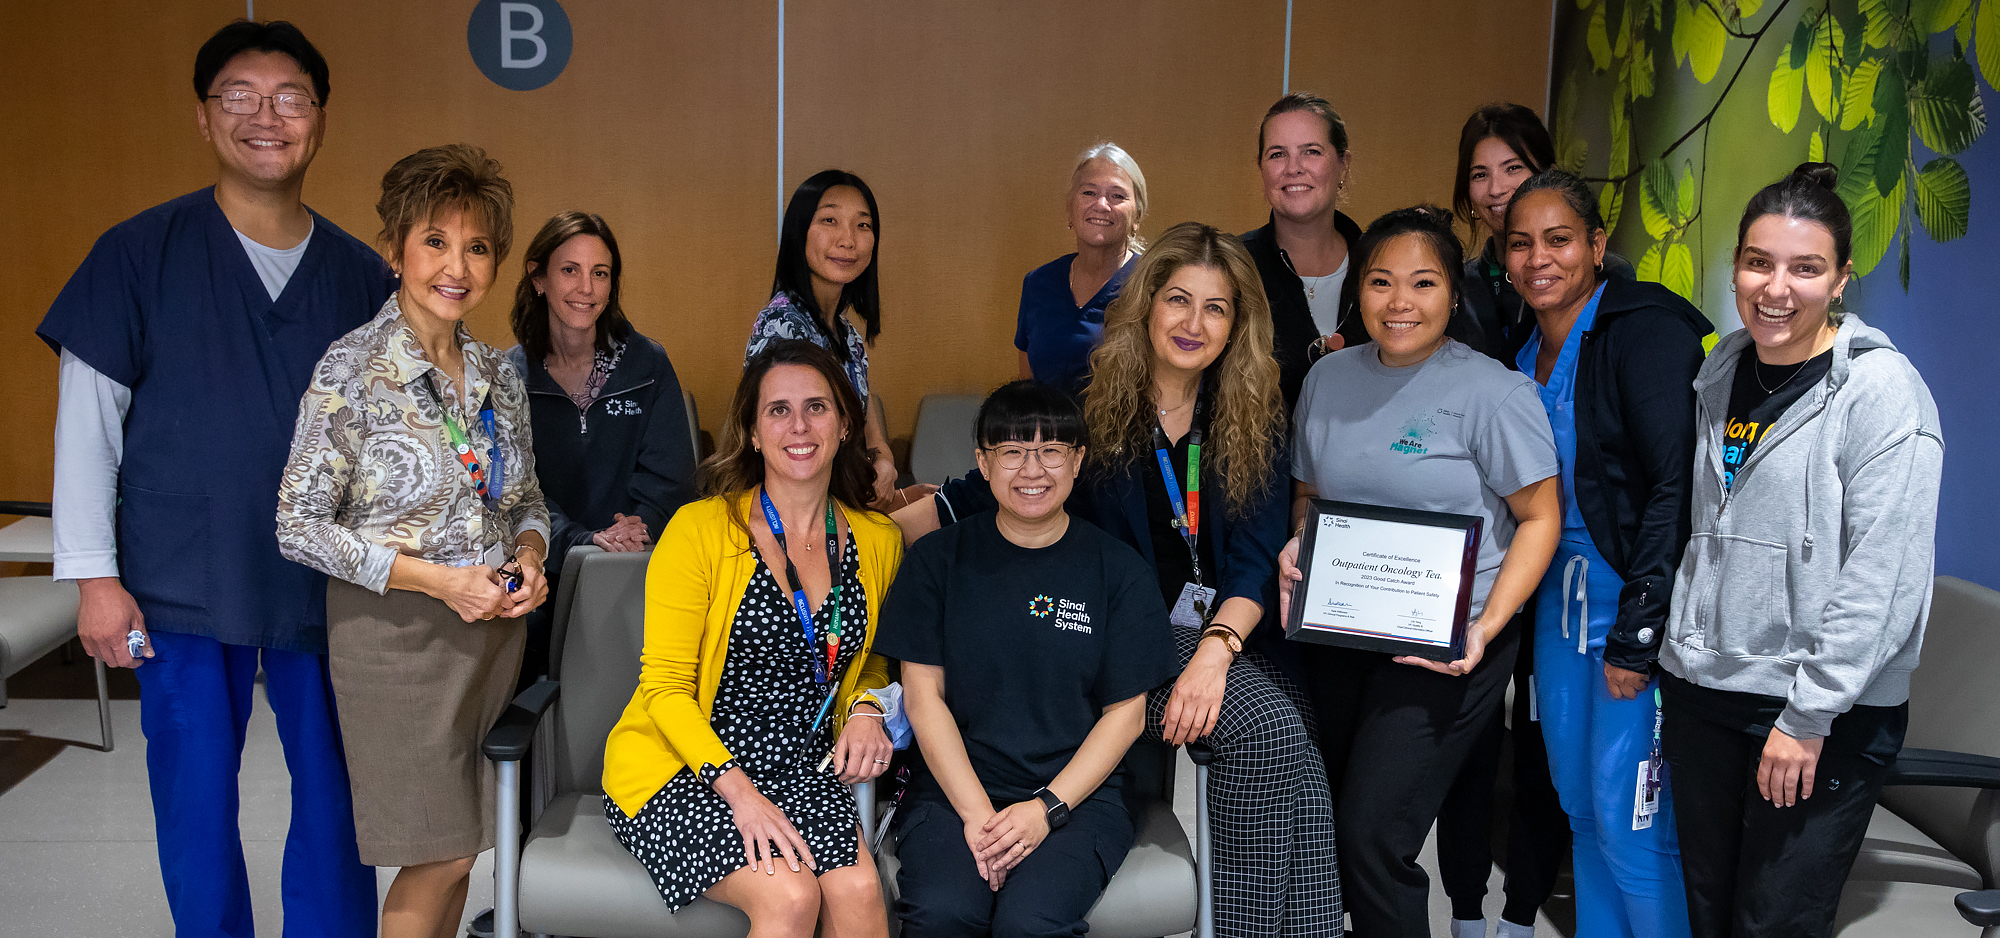 Celebrating advancements in Quality and Safety at Sinai Health